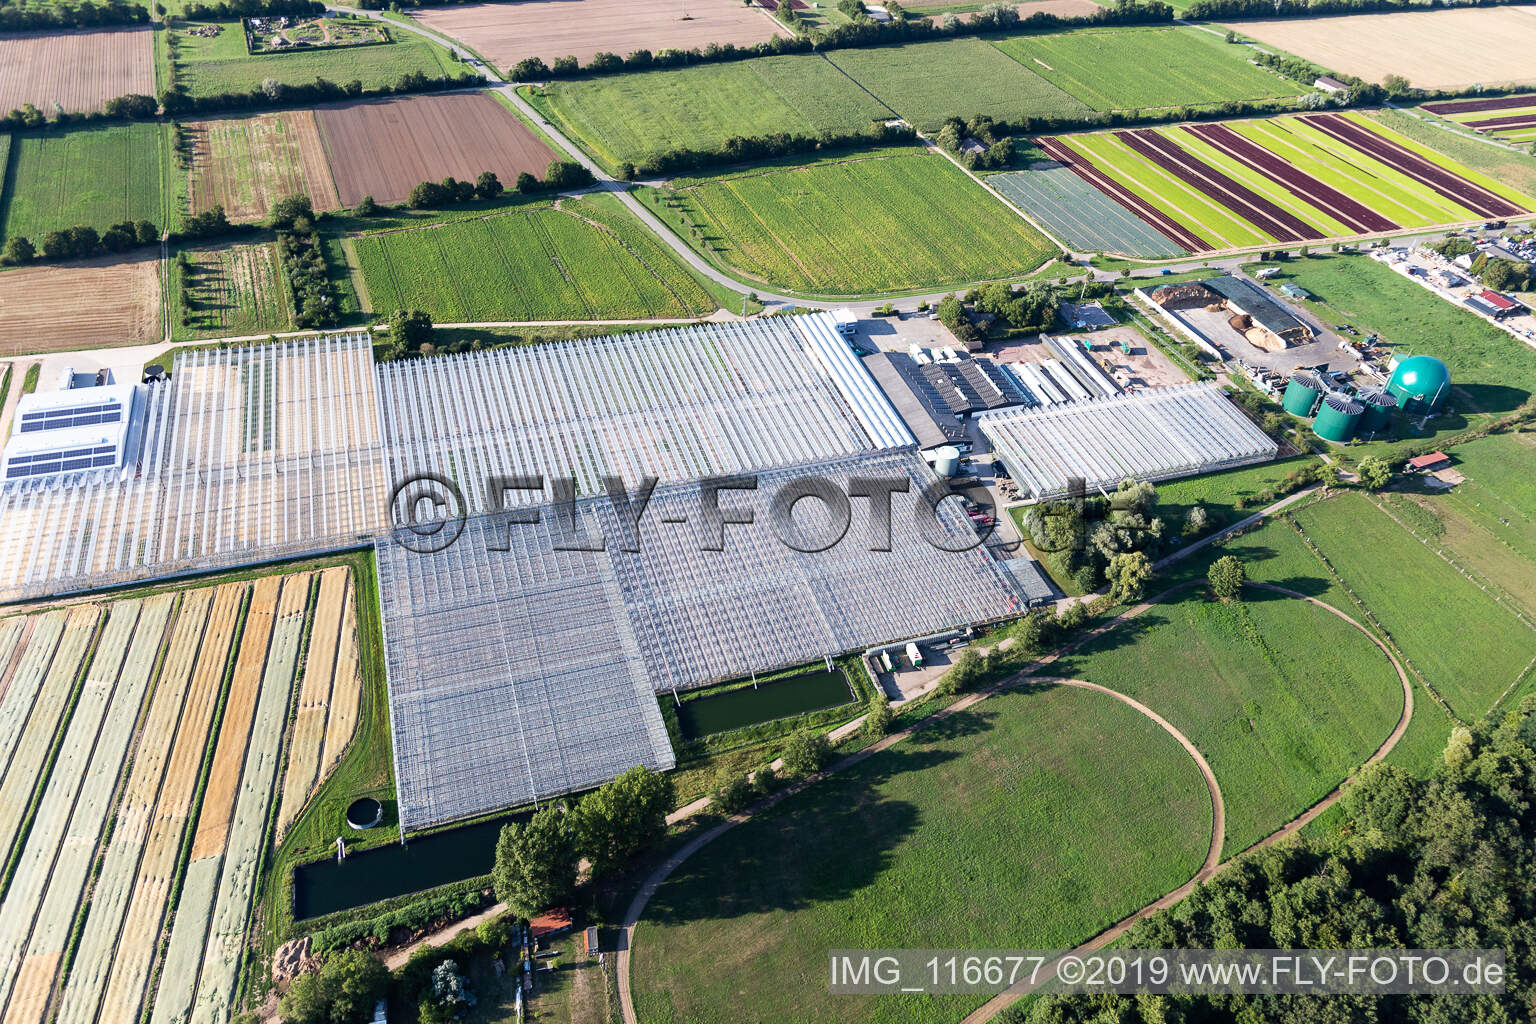 Rudolf Sinn Young Plants GmbH in Lustadt in the state Rhineland-Palatinate, Germany